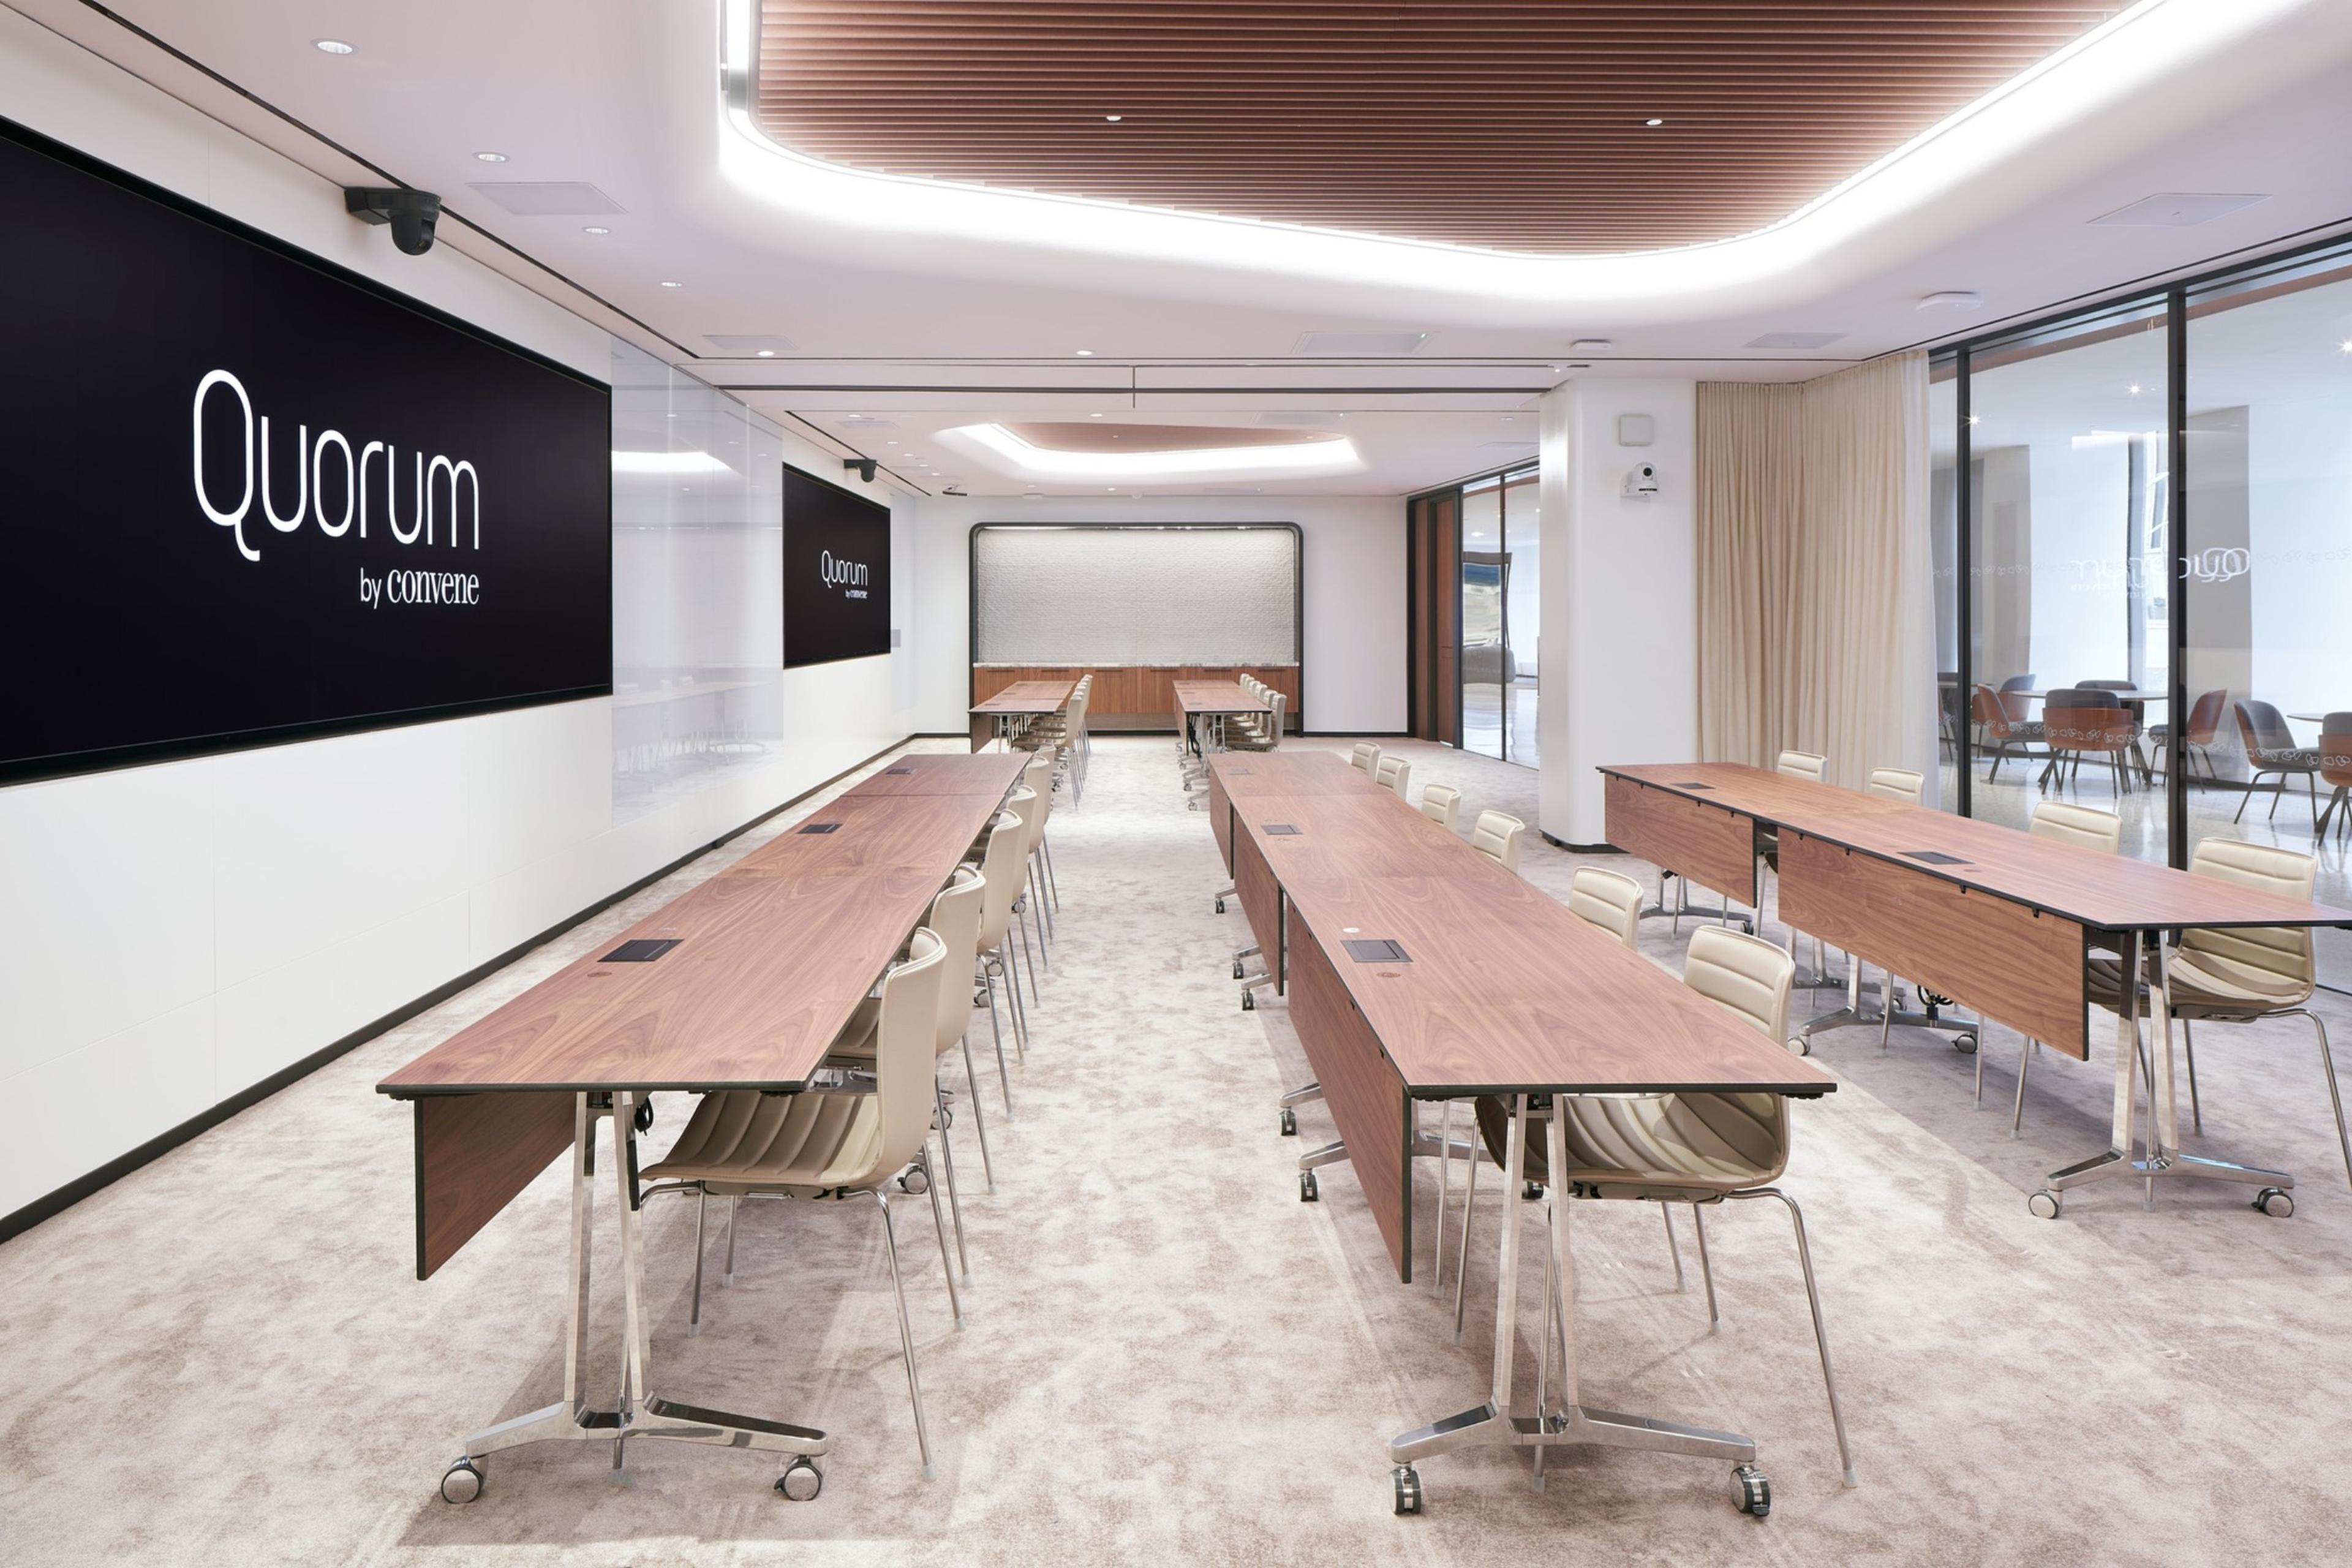 Quorum by Convene at 1221 Avenue of the Americas